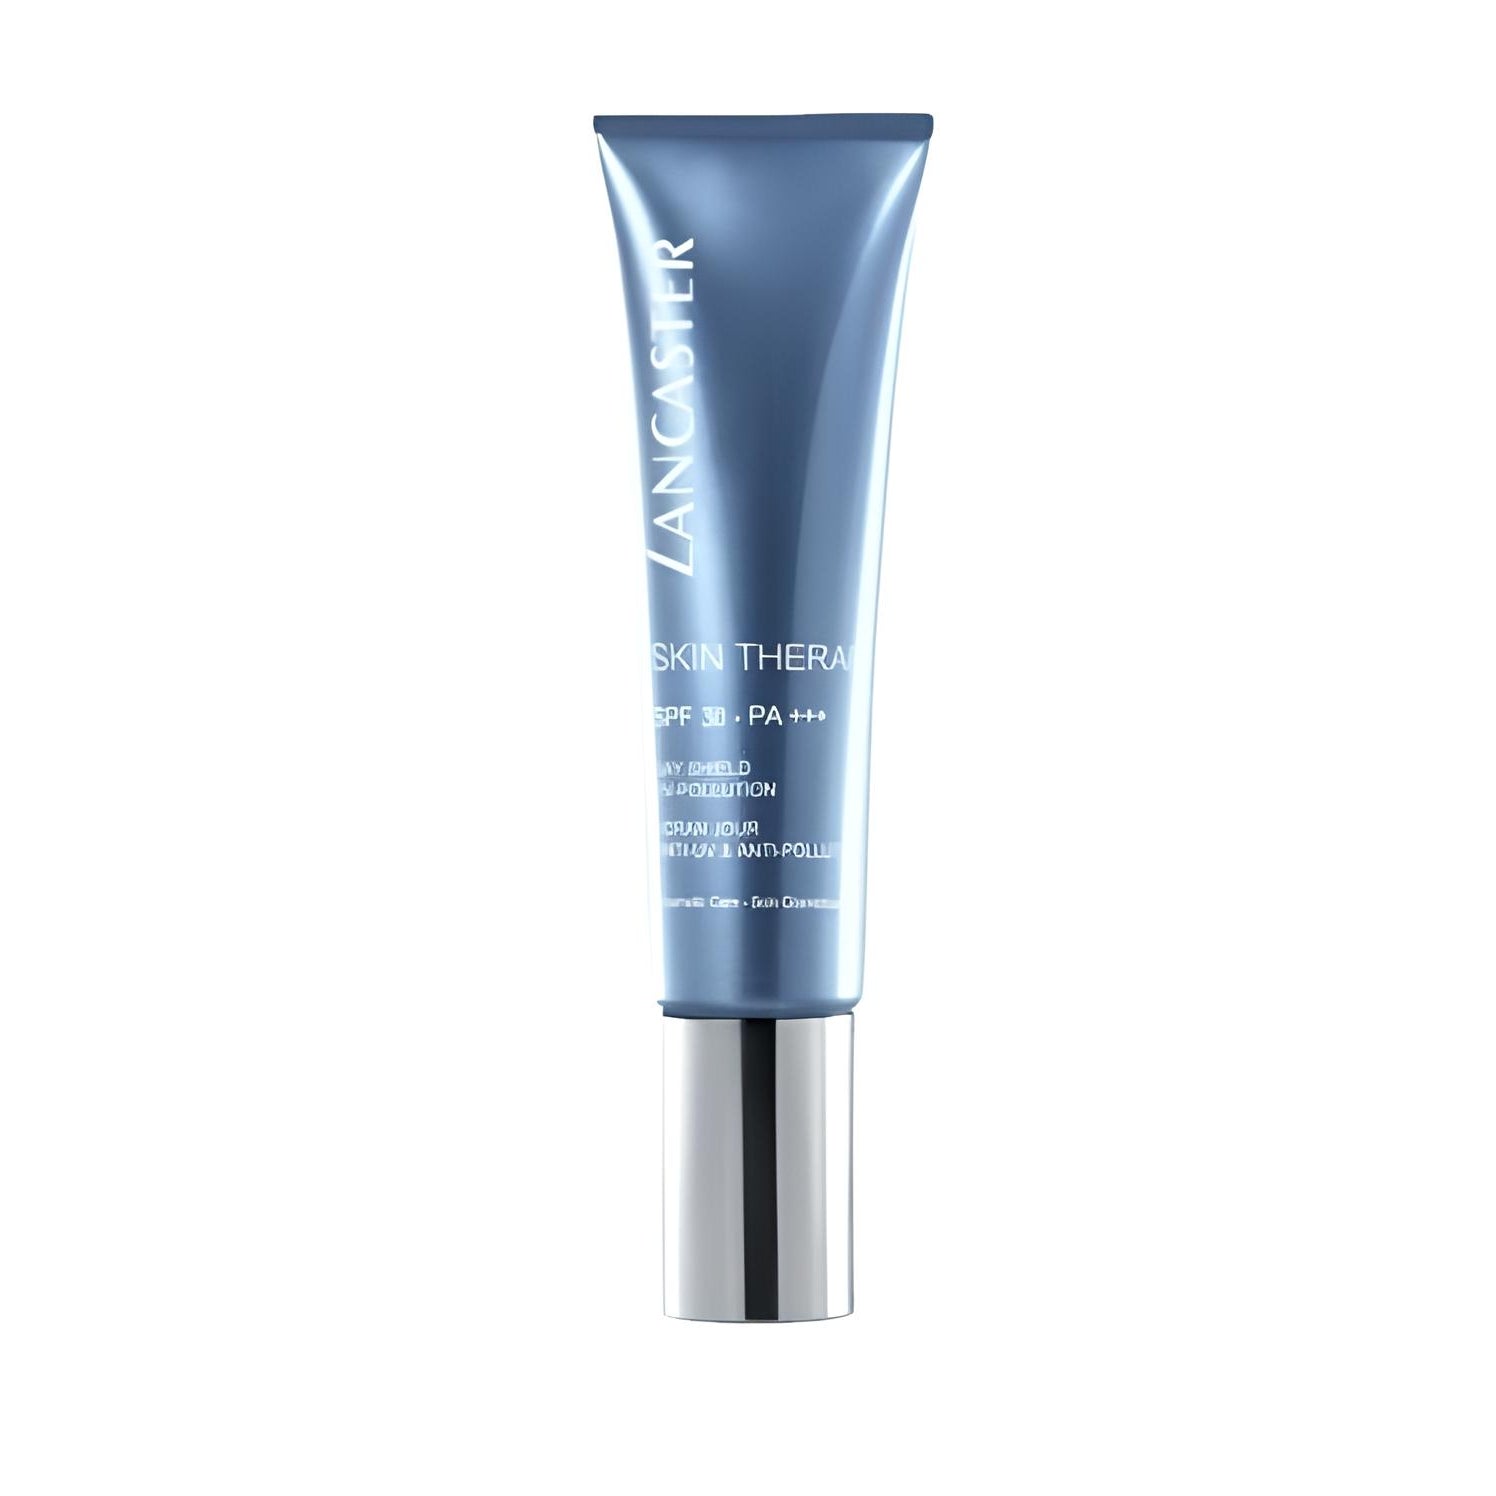 SKIN THERAPY daily sun protection SPF30 Gesichtspflege LANCASTER   